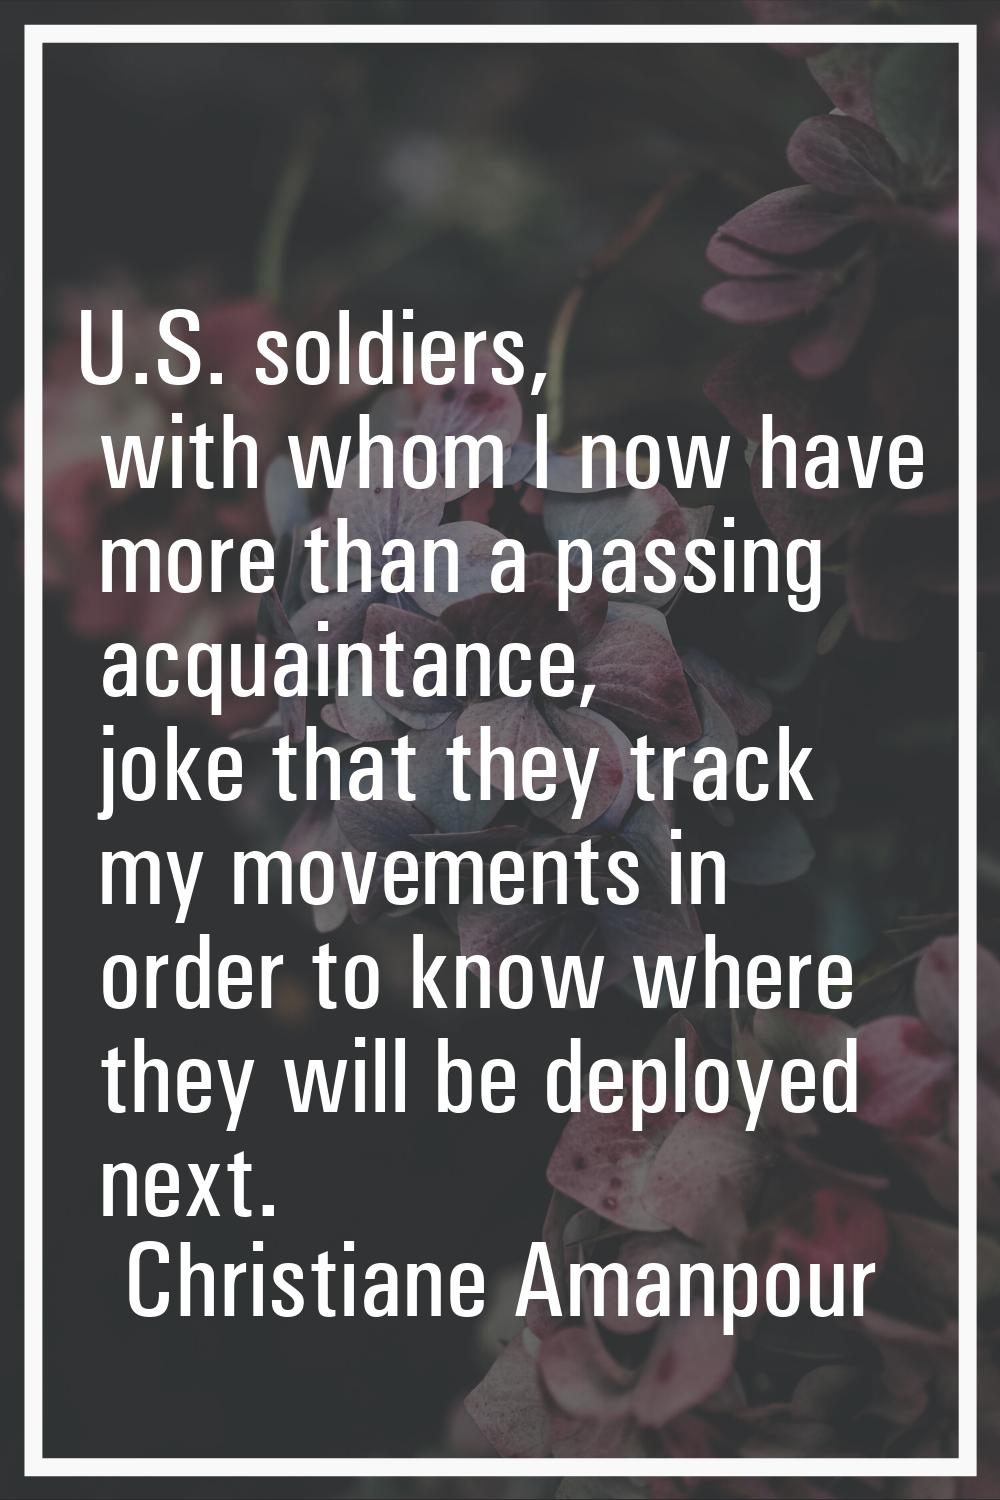 U.S. soldiers, with whom I now have more than a passing acquaintance, joke that they track my movem